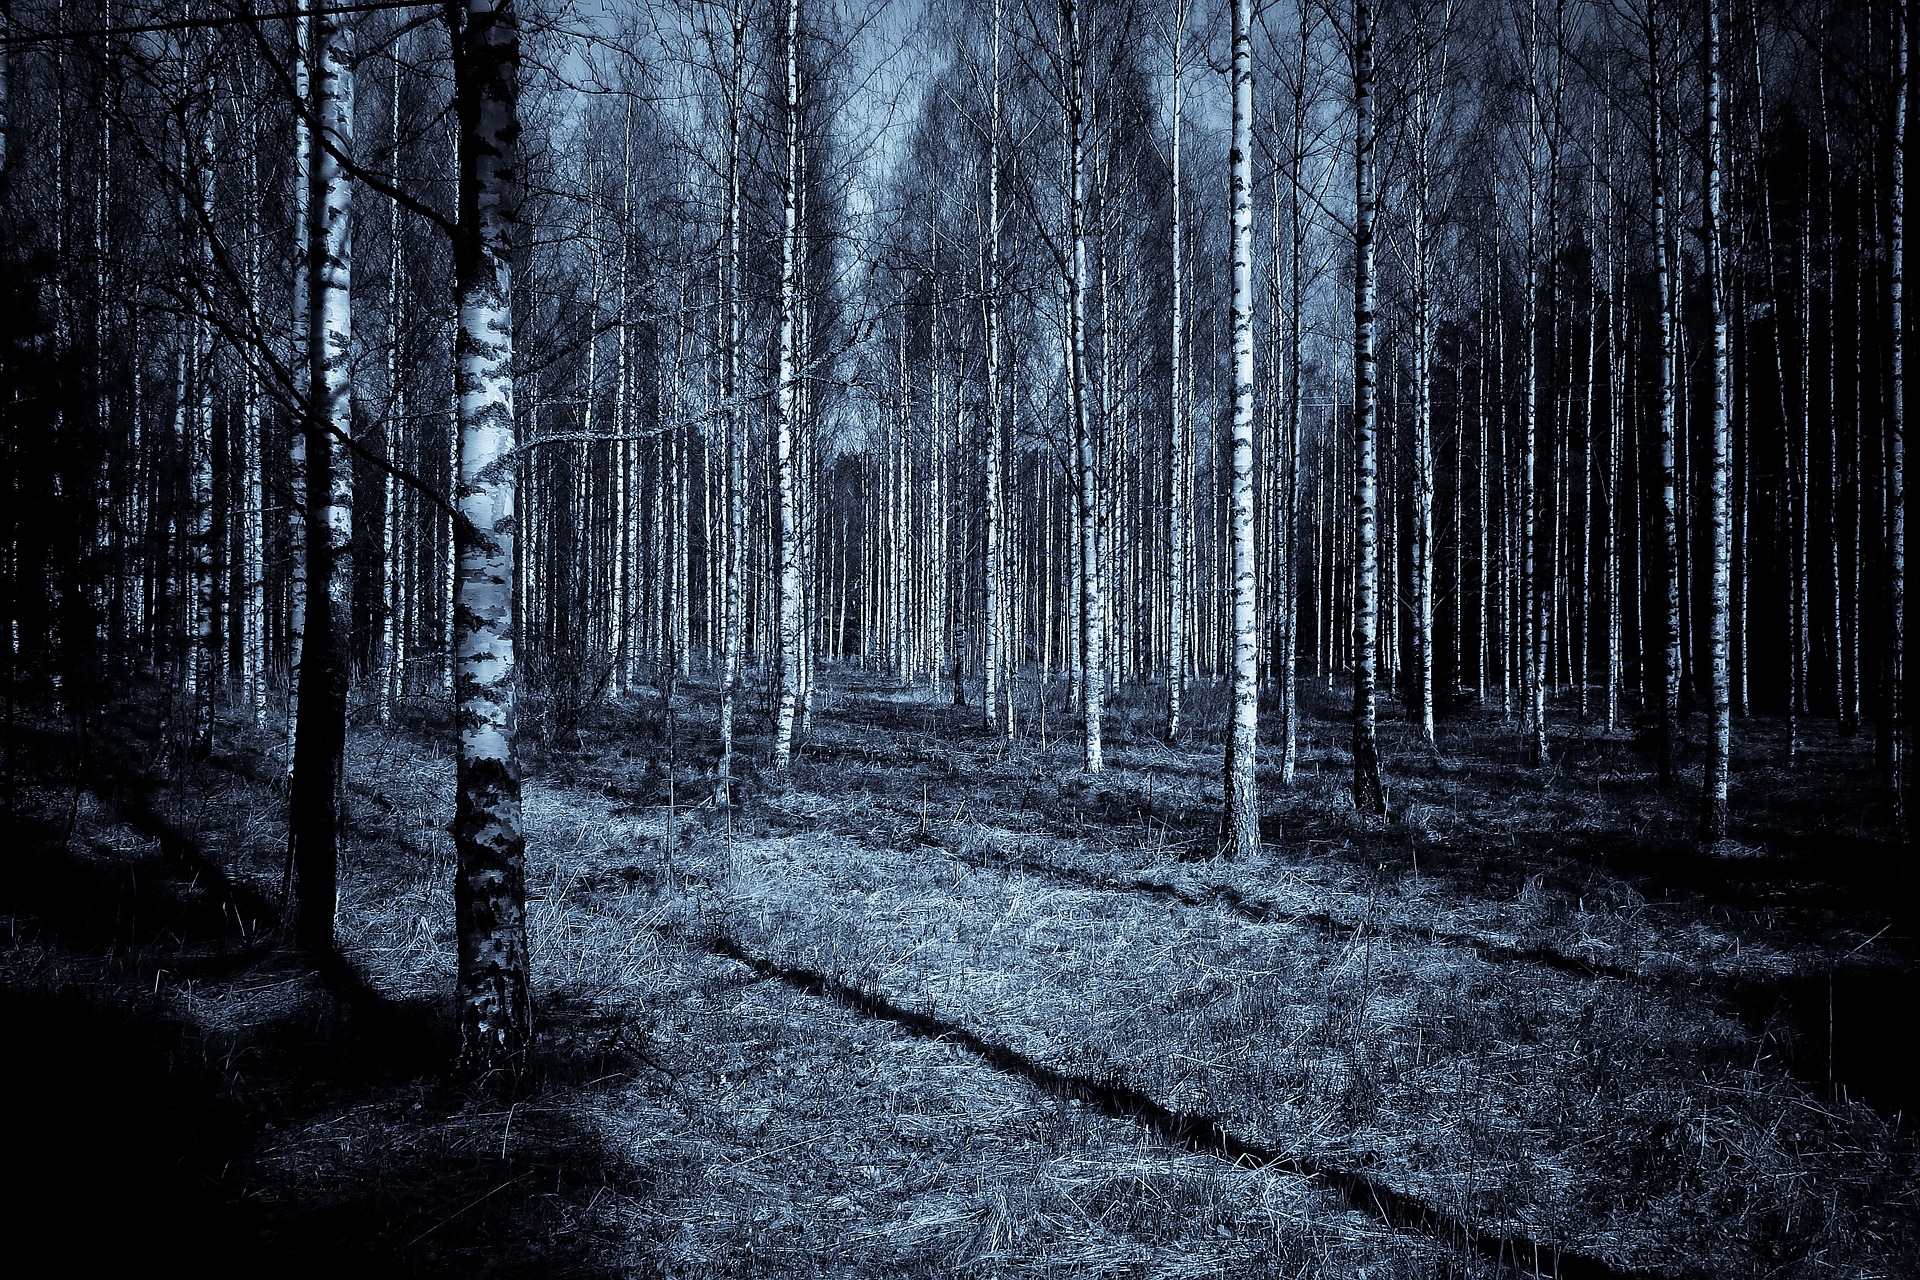 A shadowy forest, in black-and-white, of many silver birch trees. It has an eerie feel.